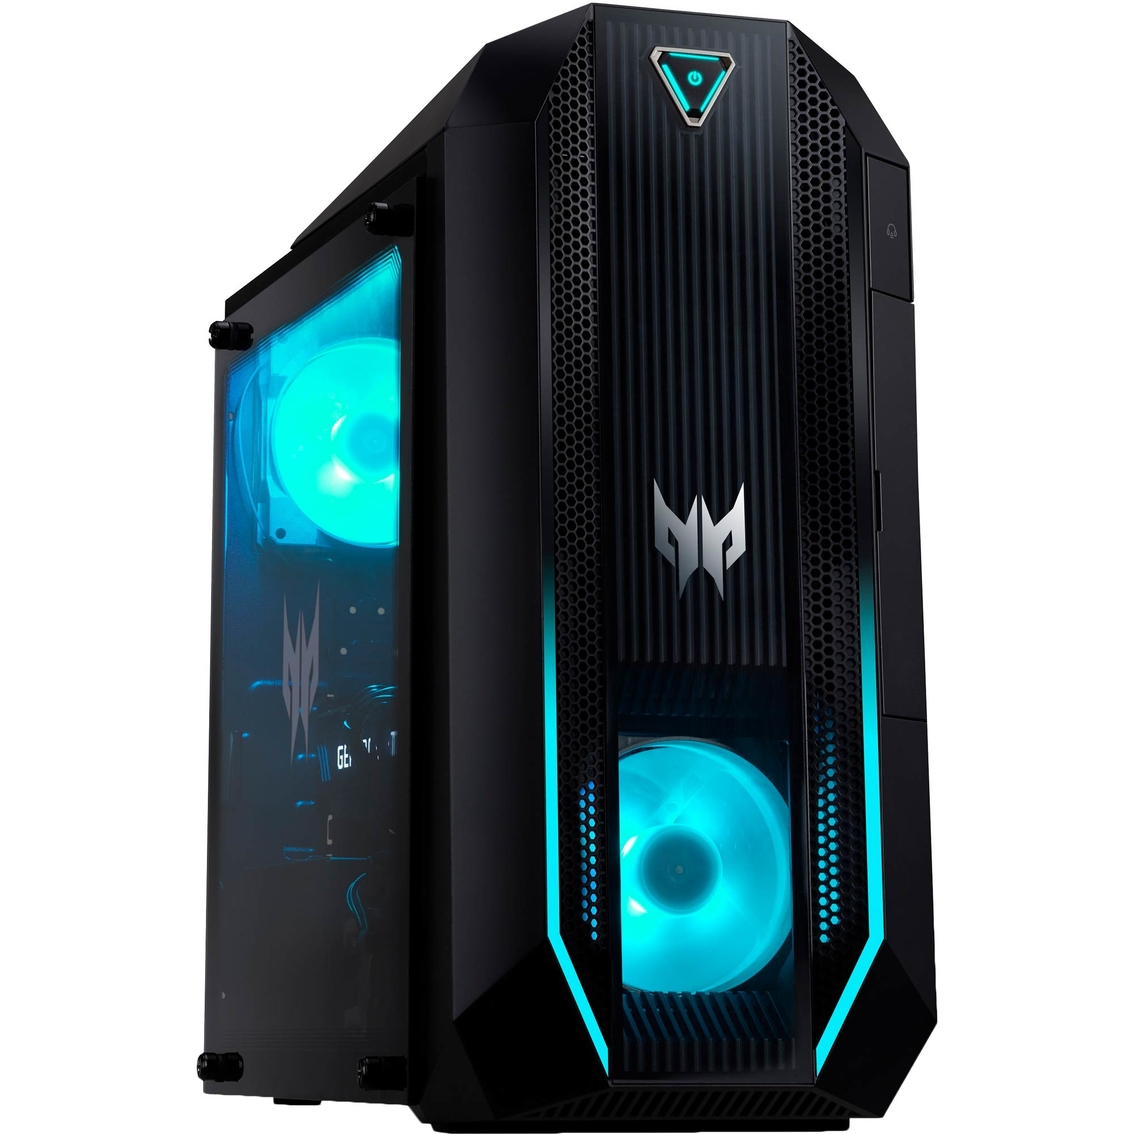 Acer Predator Orion Intel Core i7 3.2GHz 16GB RAM 512GB SSD + 1TB HDD Gaming PC - Image 2 of 4